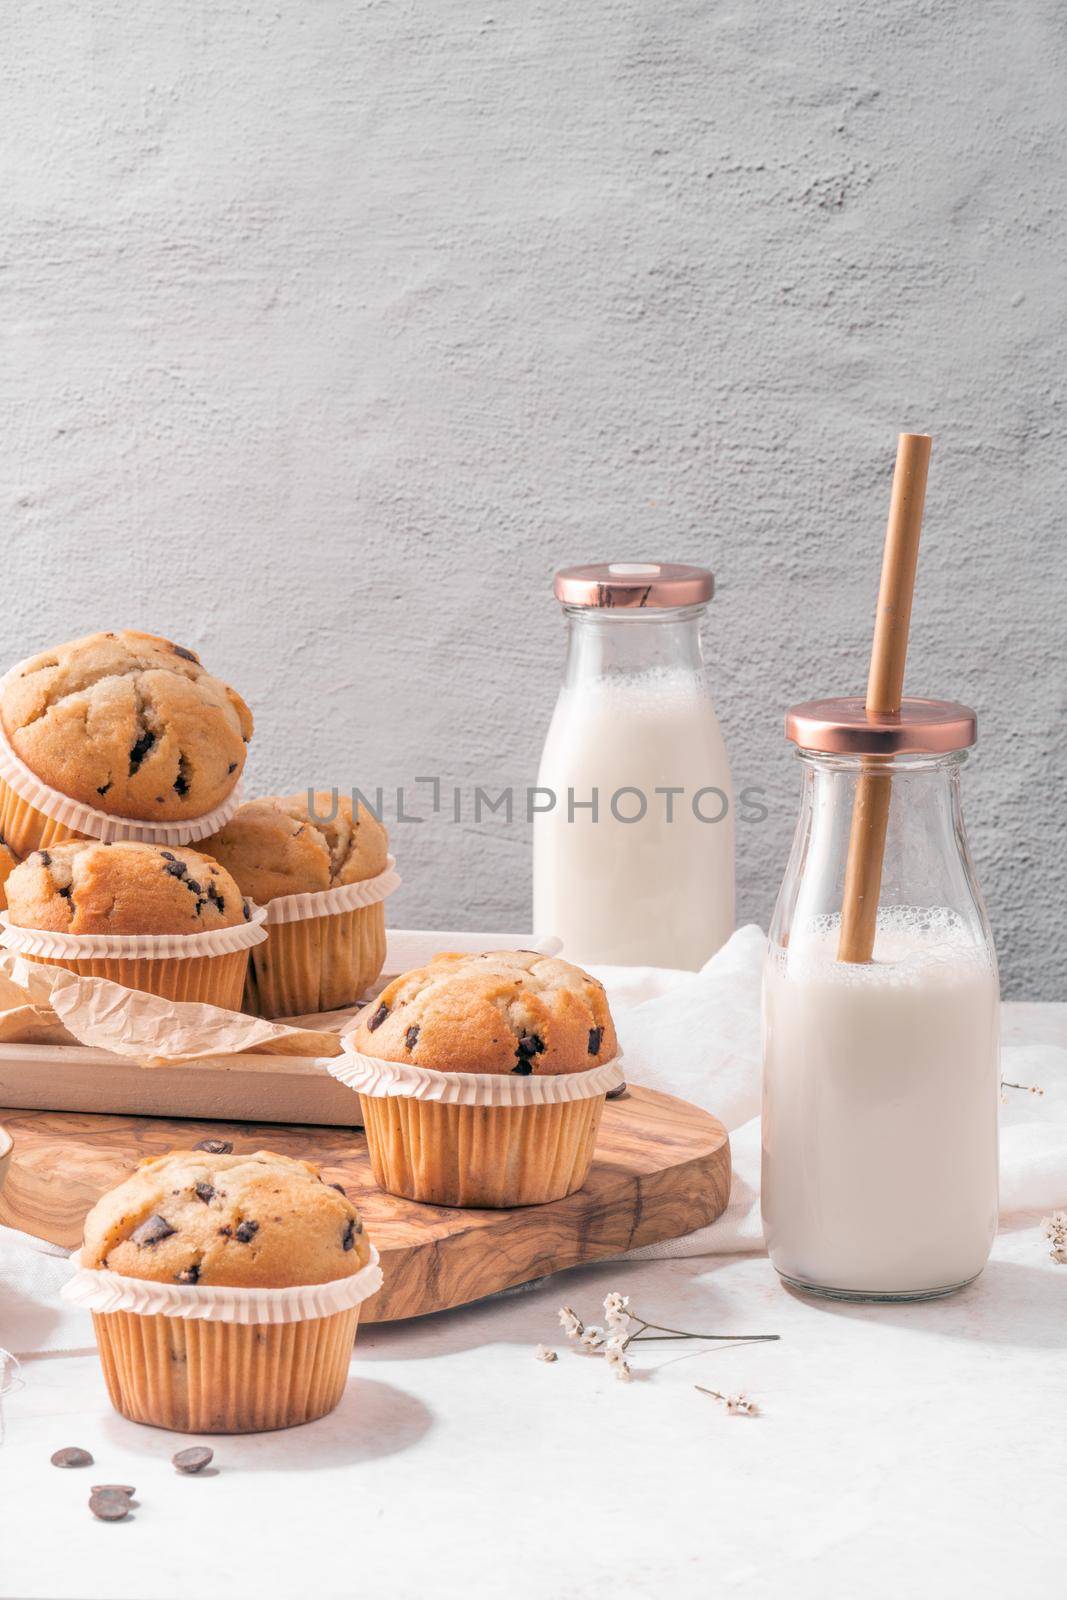 Chocolate chip muffins with milk served on glass bottles on white kitchen countertop.